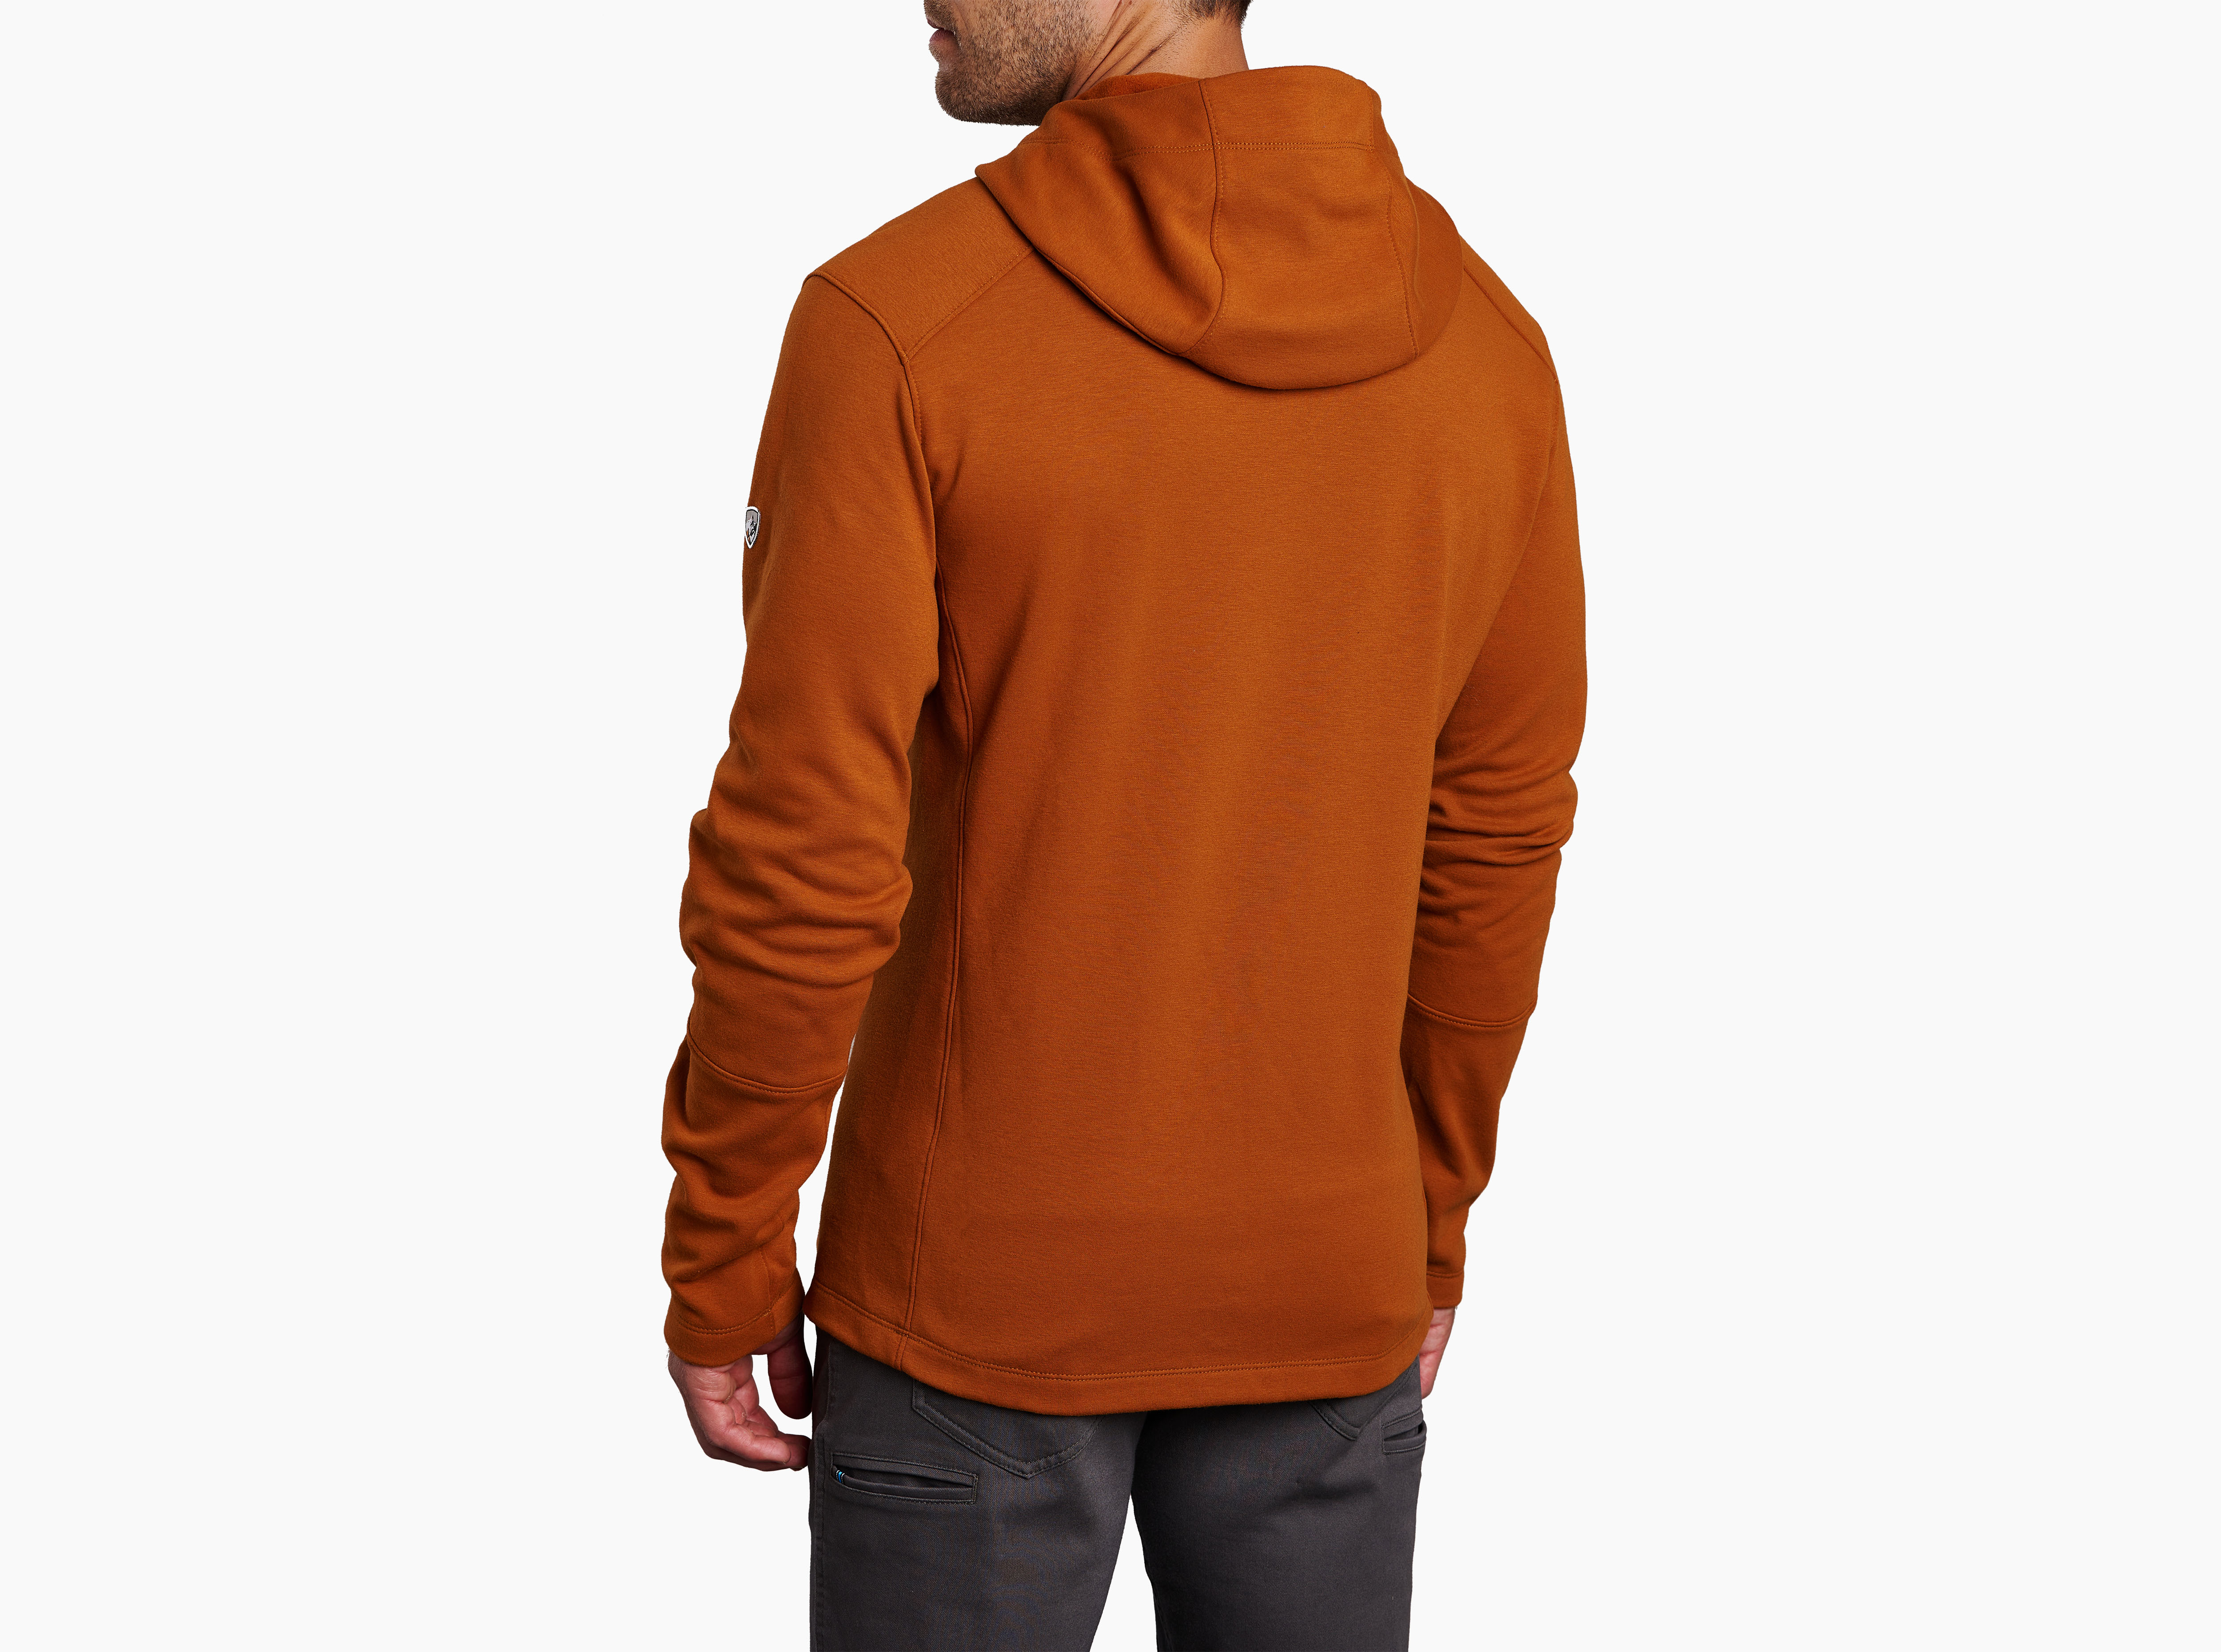 Kuhl Spekter Pullover Hoodie, Shirts, Clothing & Accessories